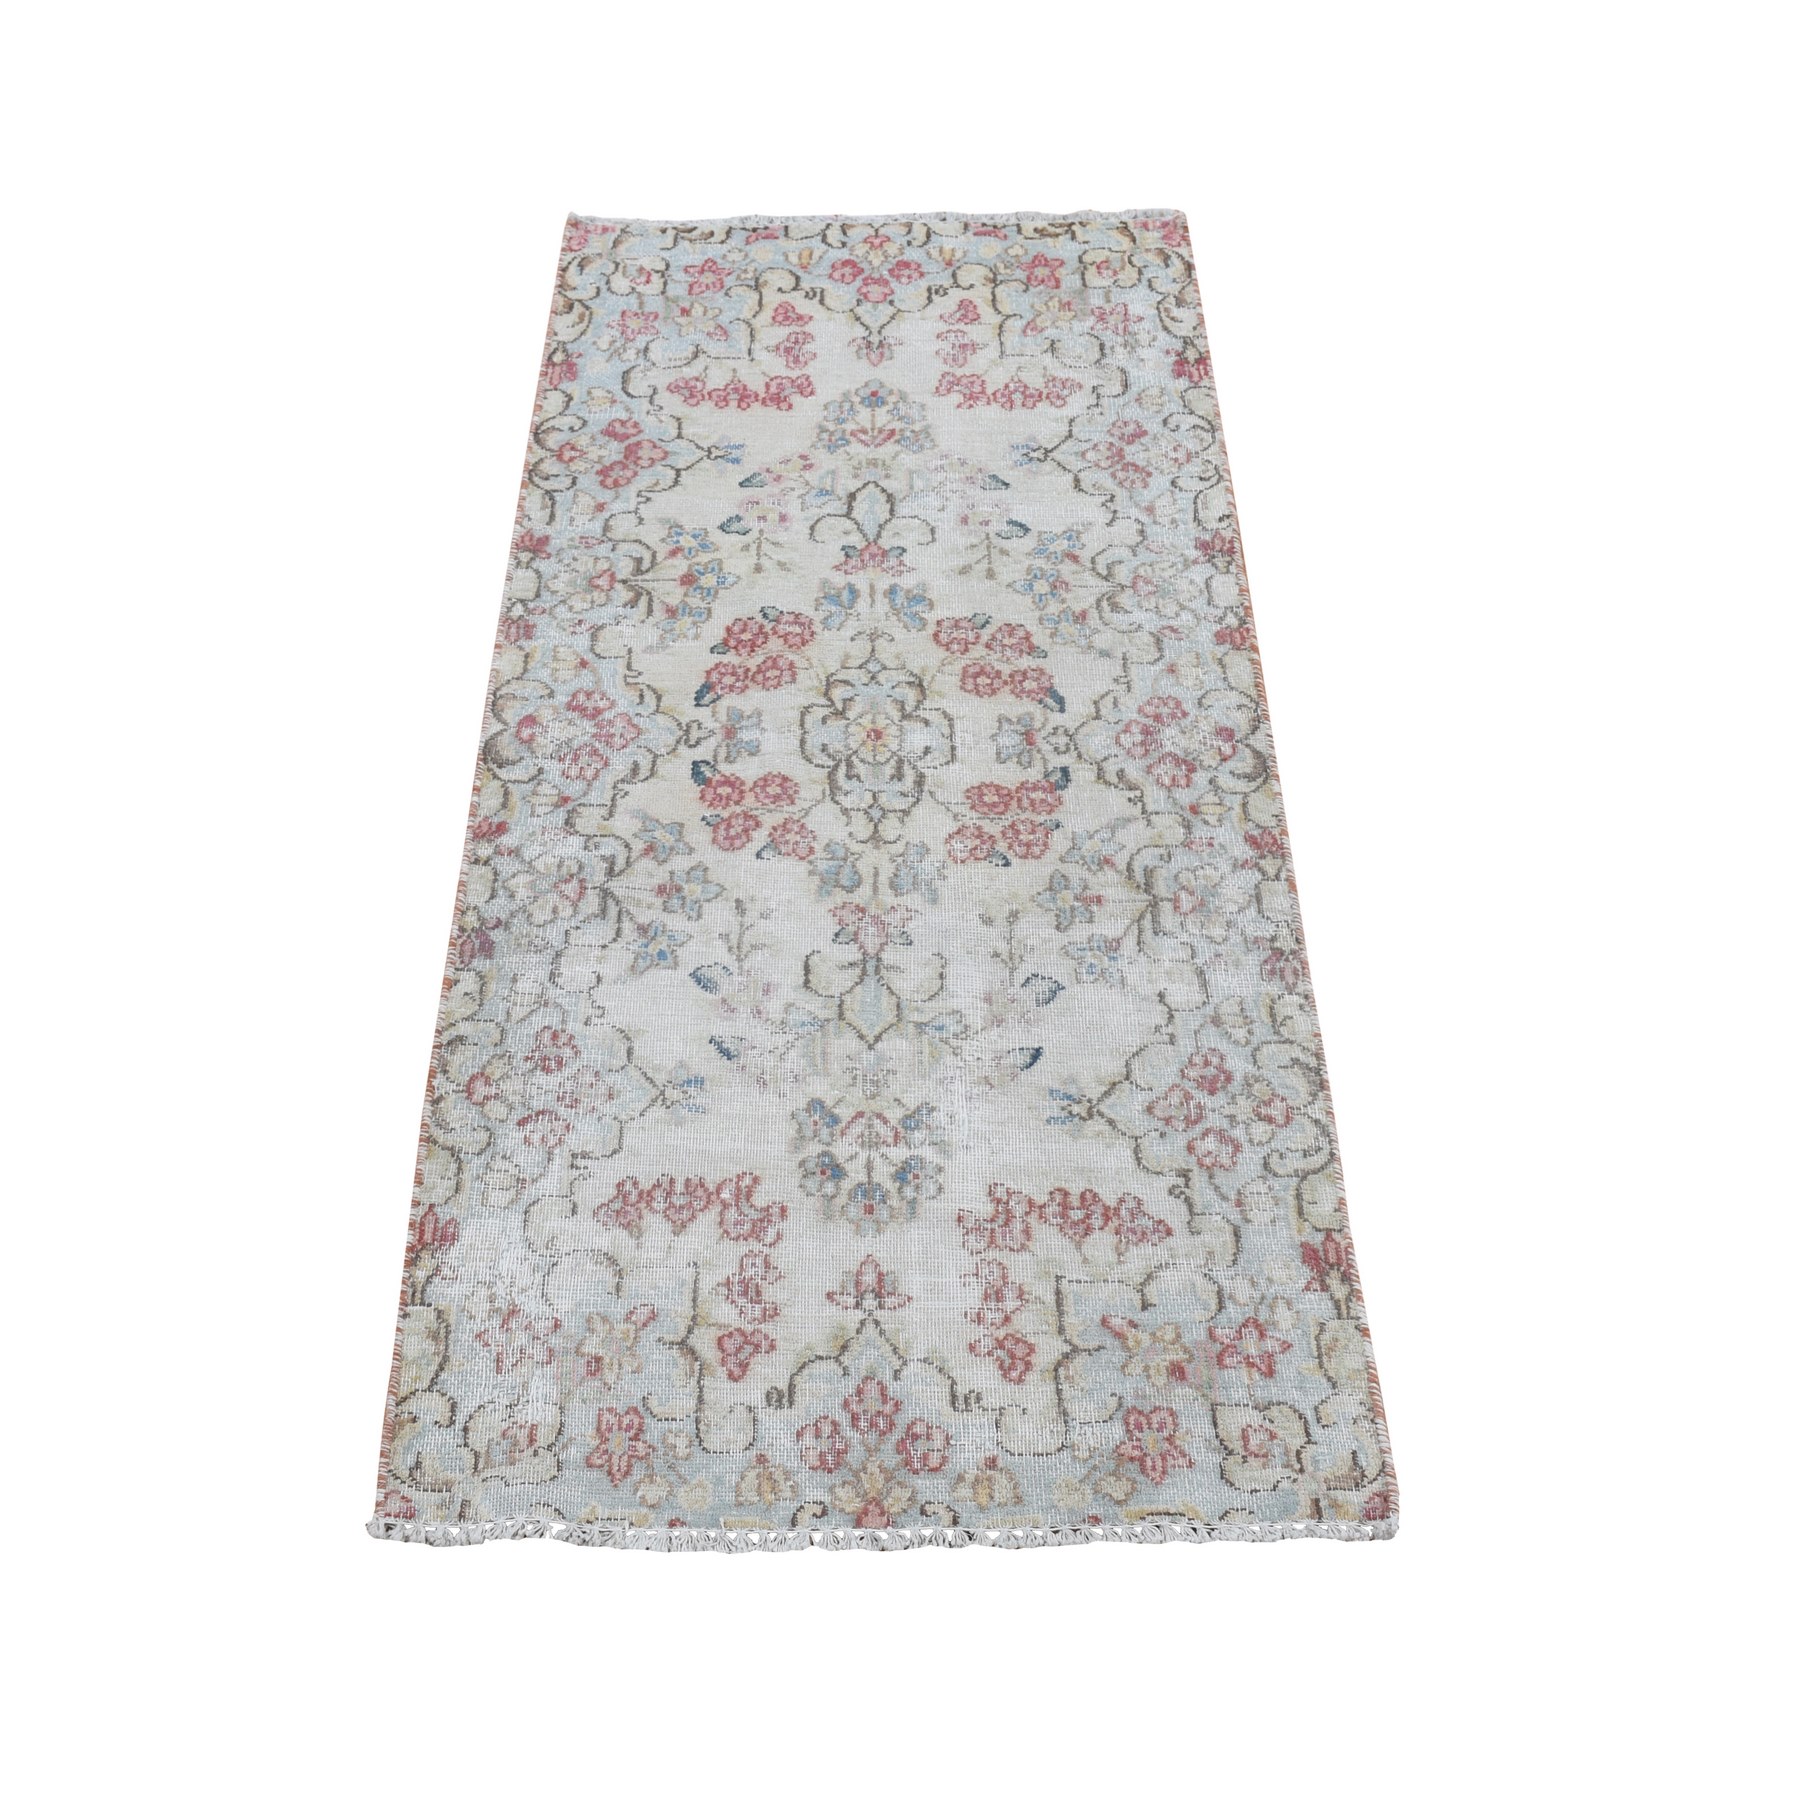  Wool Hand-Knotted Area Rug 1'9